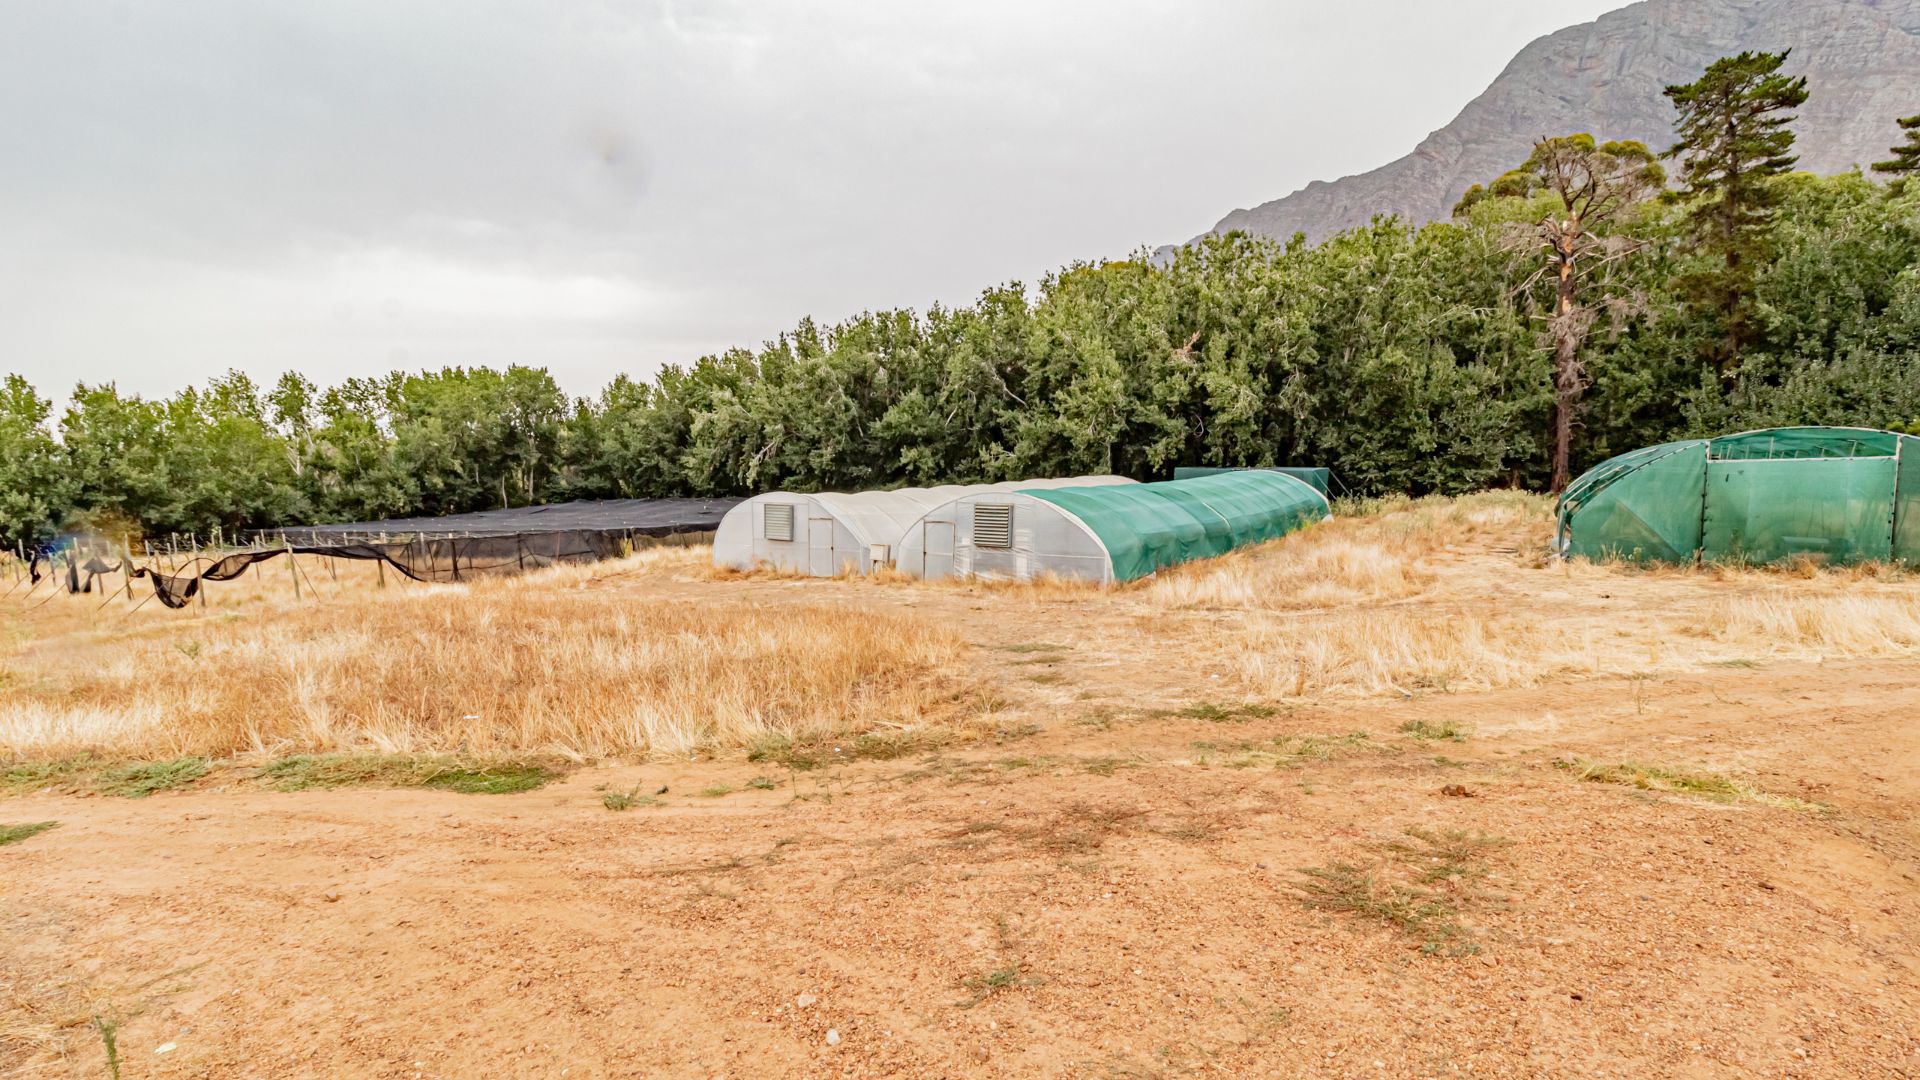 Land in Tulbagh - Image-083.jpg